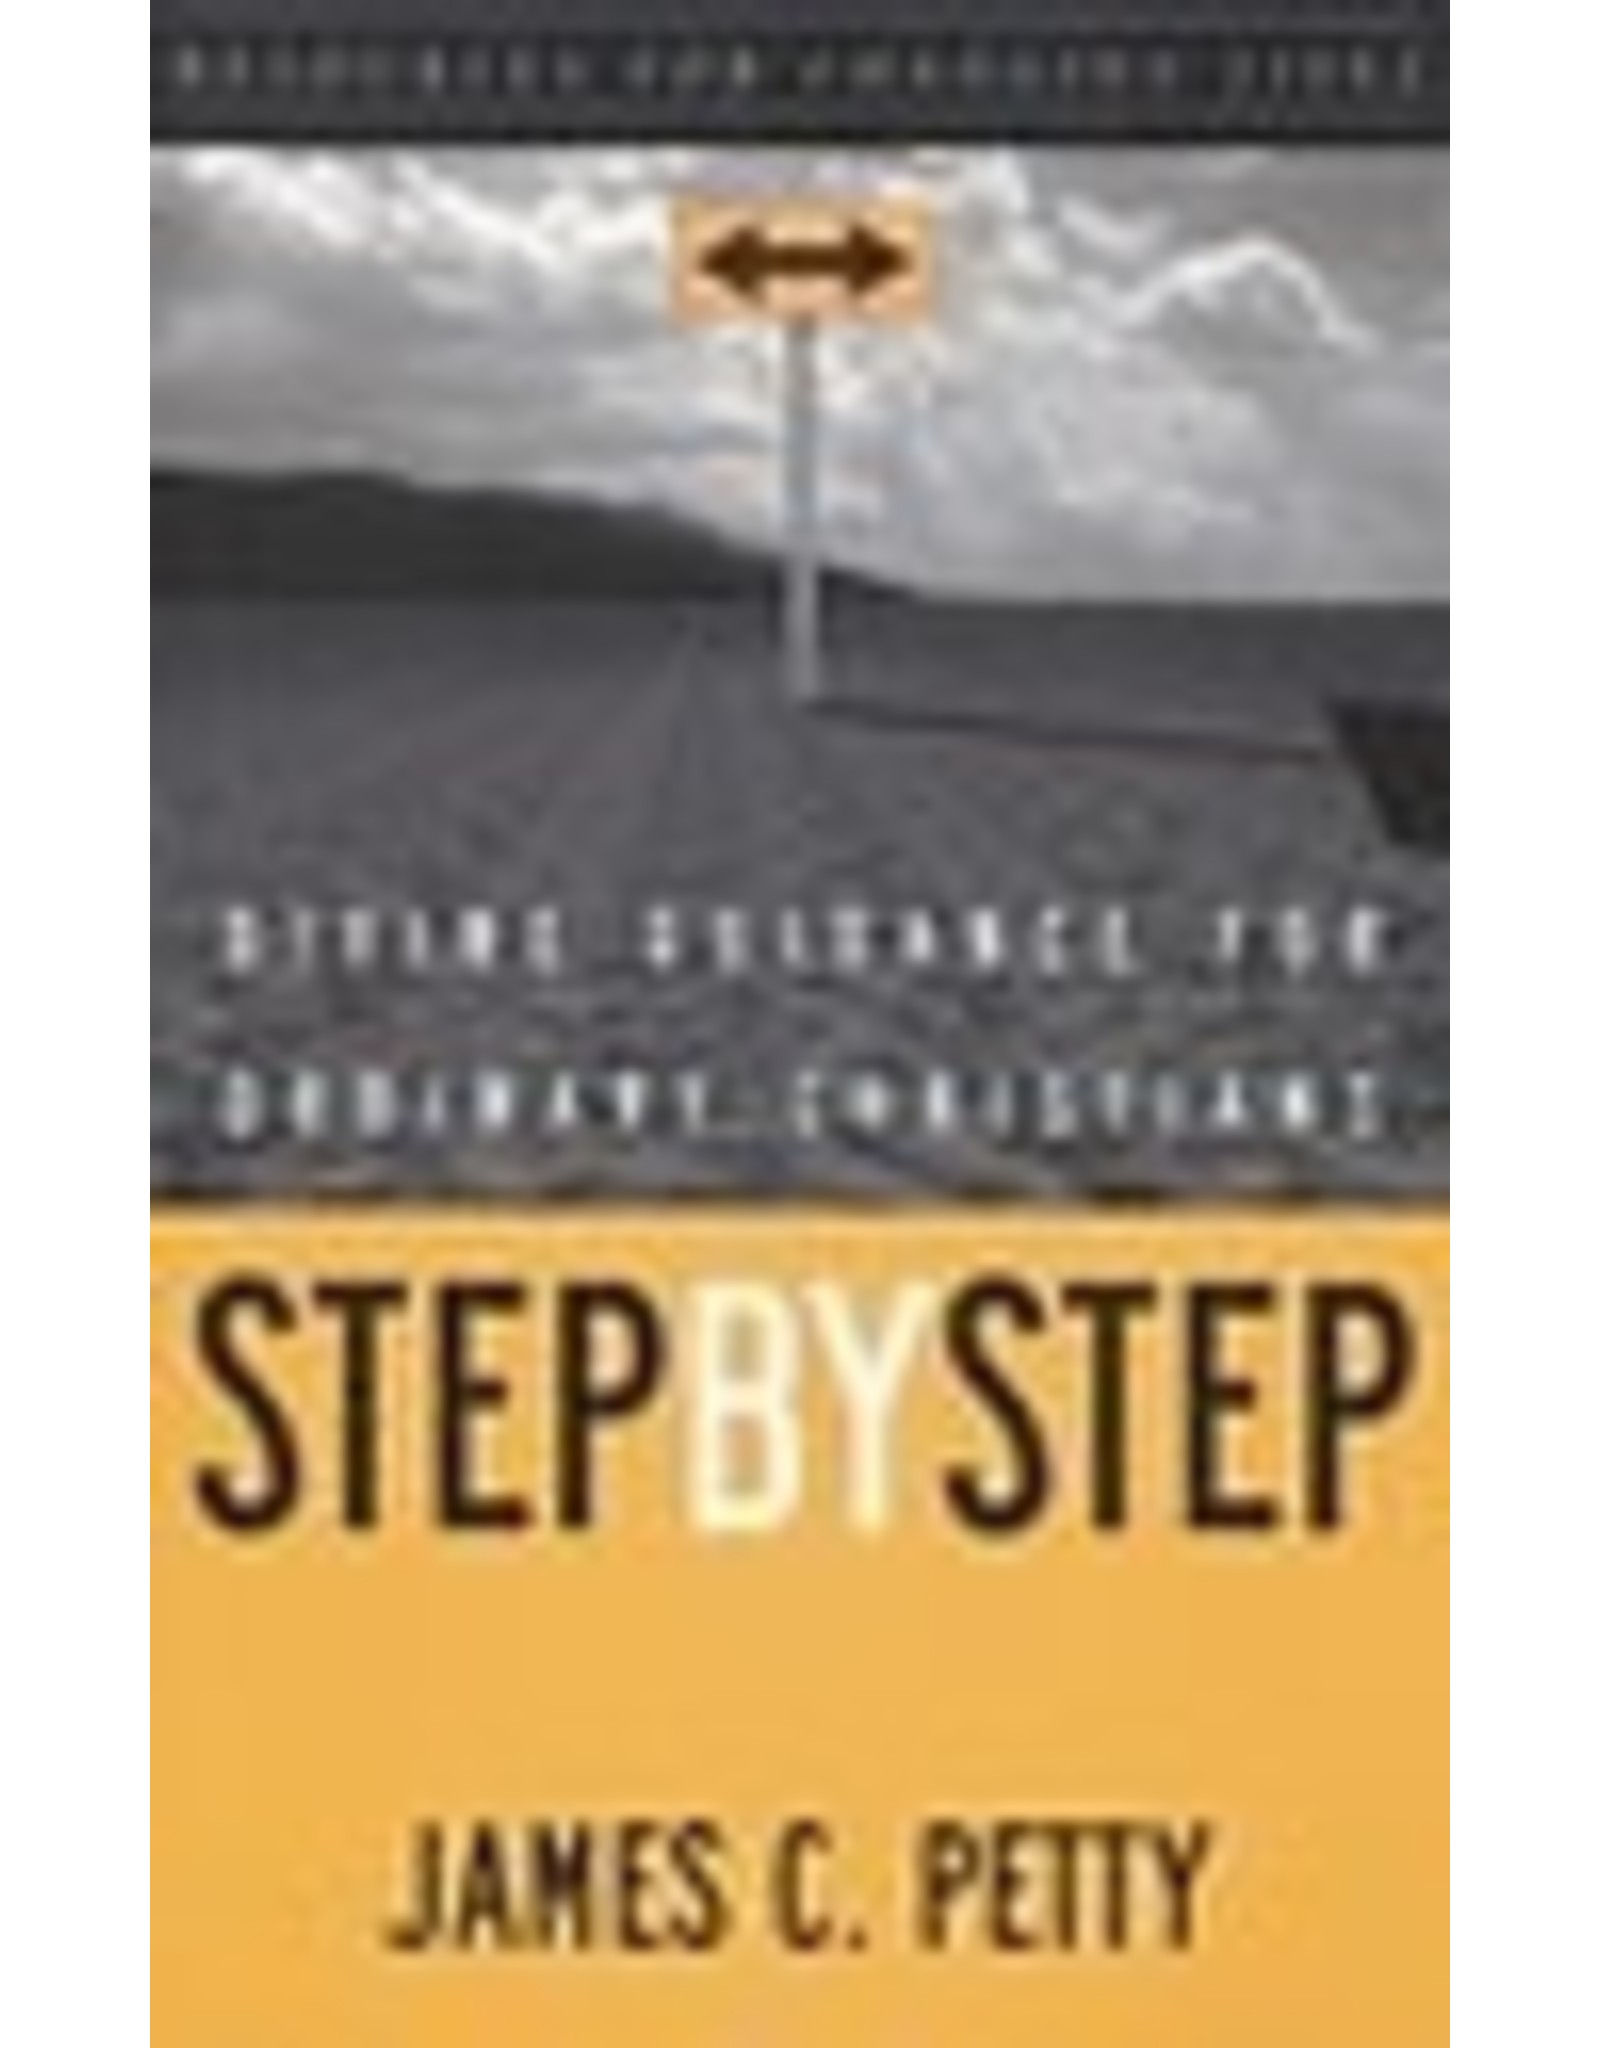 James C. Petty Step by Step